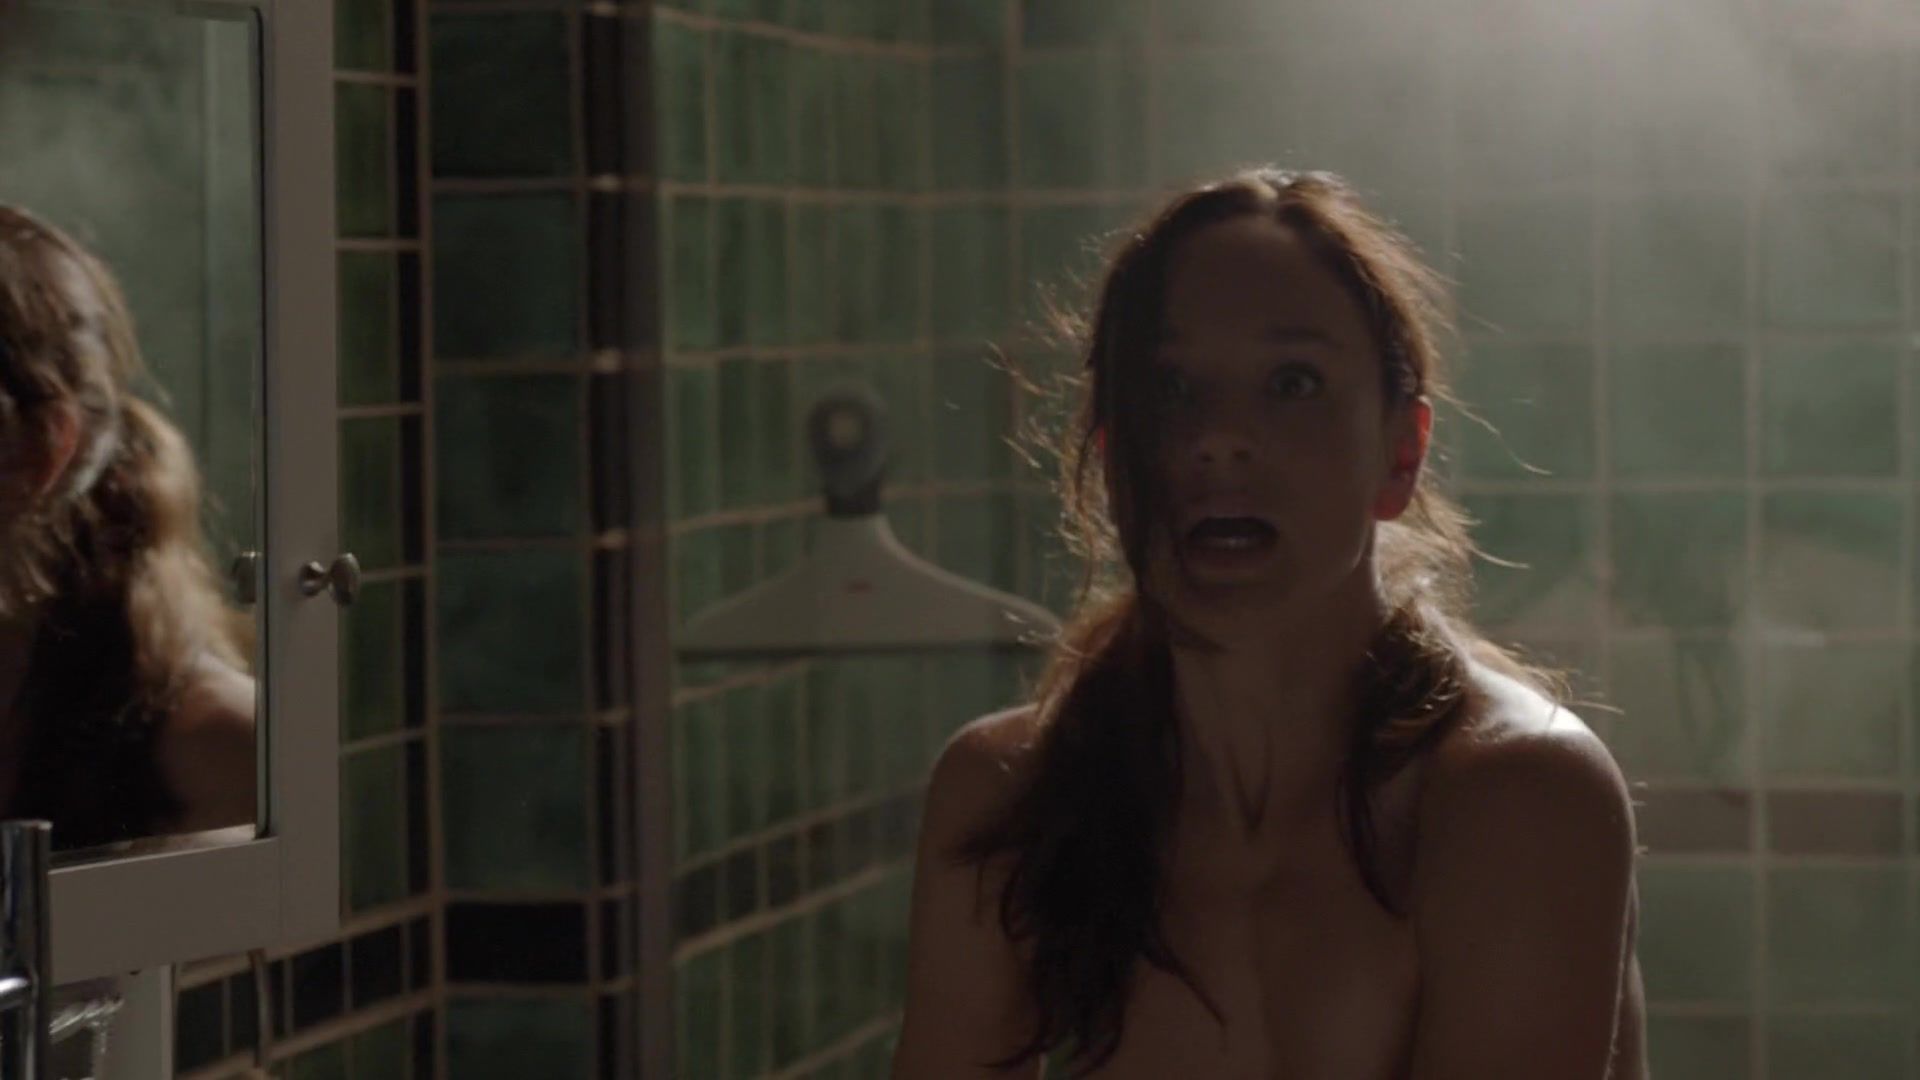 Ikillitts Naked Sarah Wayne Callies in Sex Scene from the TV show "Colony" s01e03 (2016) Big Black Cock